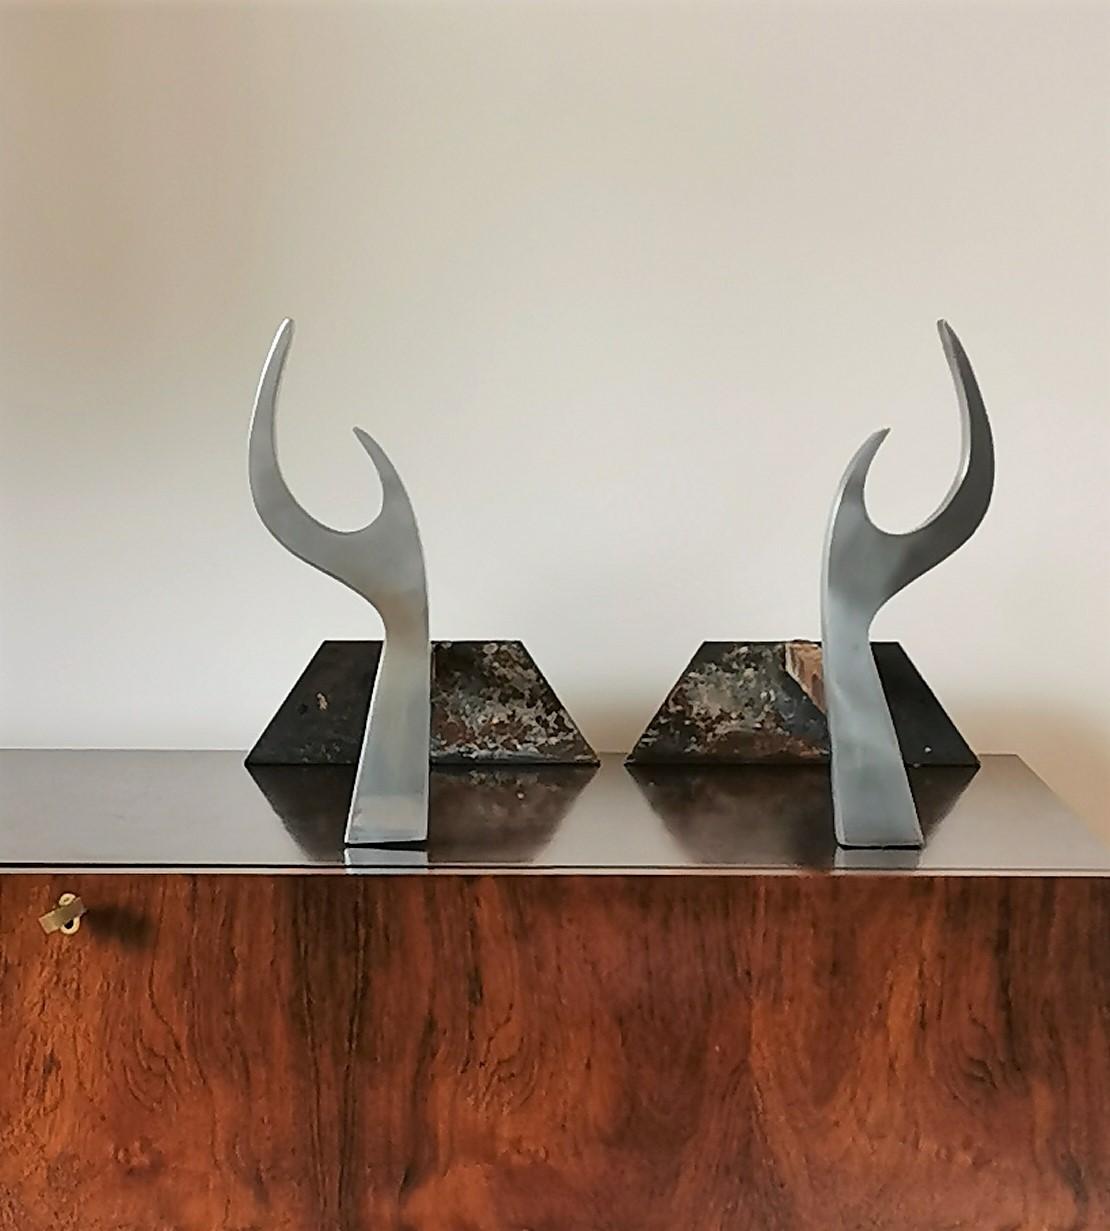 Minimalist nickel-plated or stainless steel andirons
Flame shaped front end
rare piece by Jean-Paul Créations, France
these andirons will ship from France
price does not include shipping nor possible customs related charges.
   